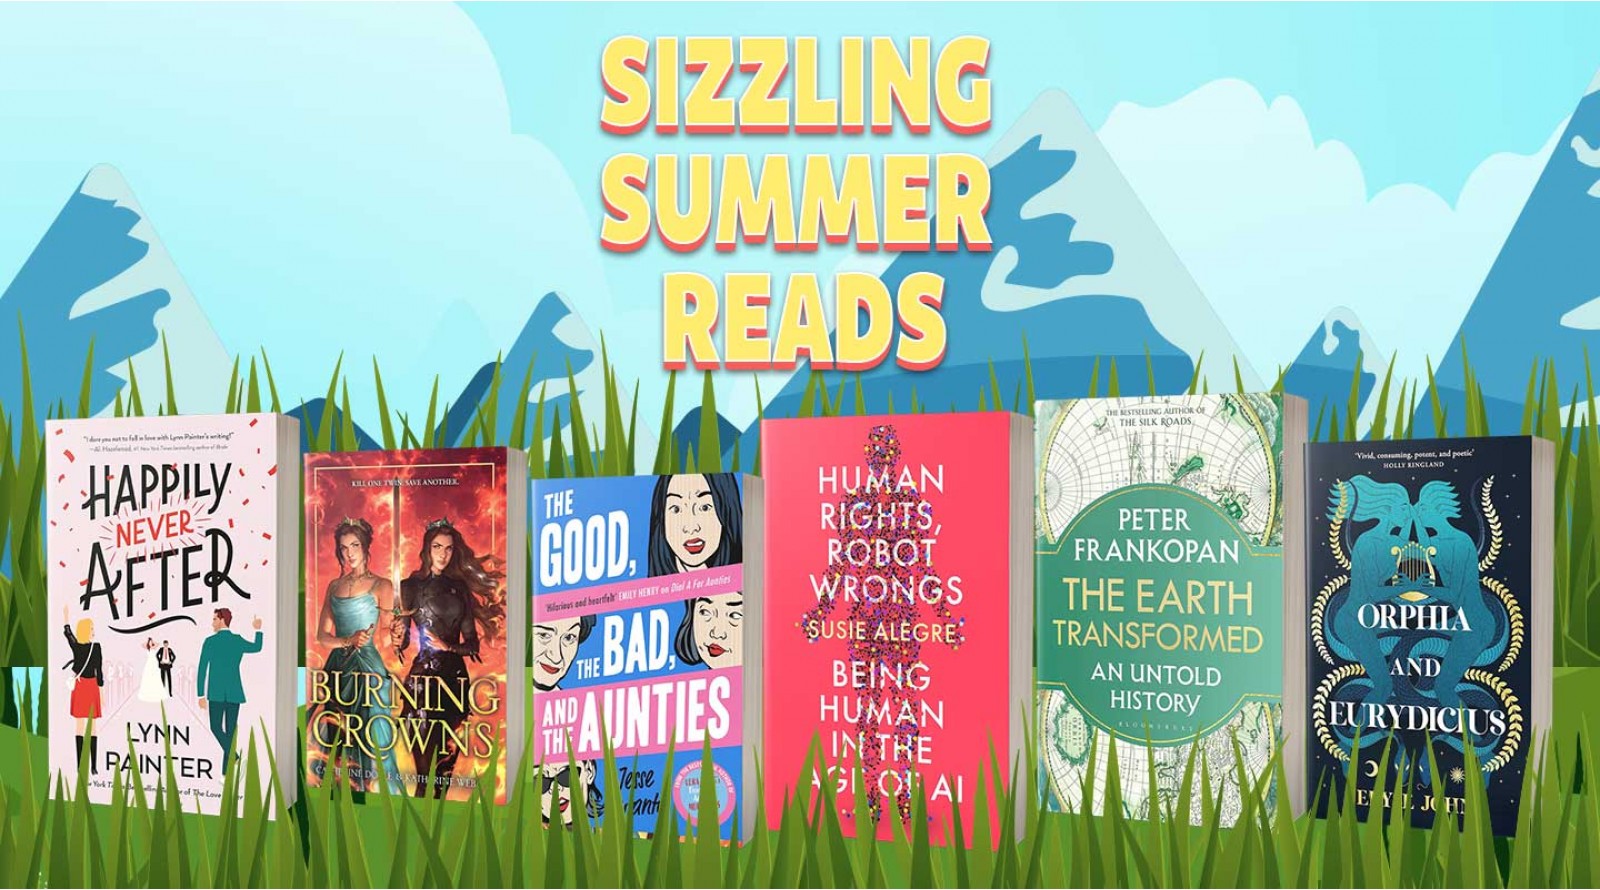 Sizzling summer reads